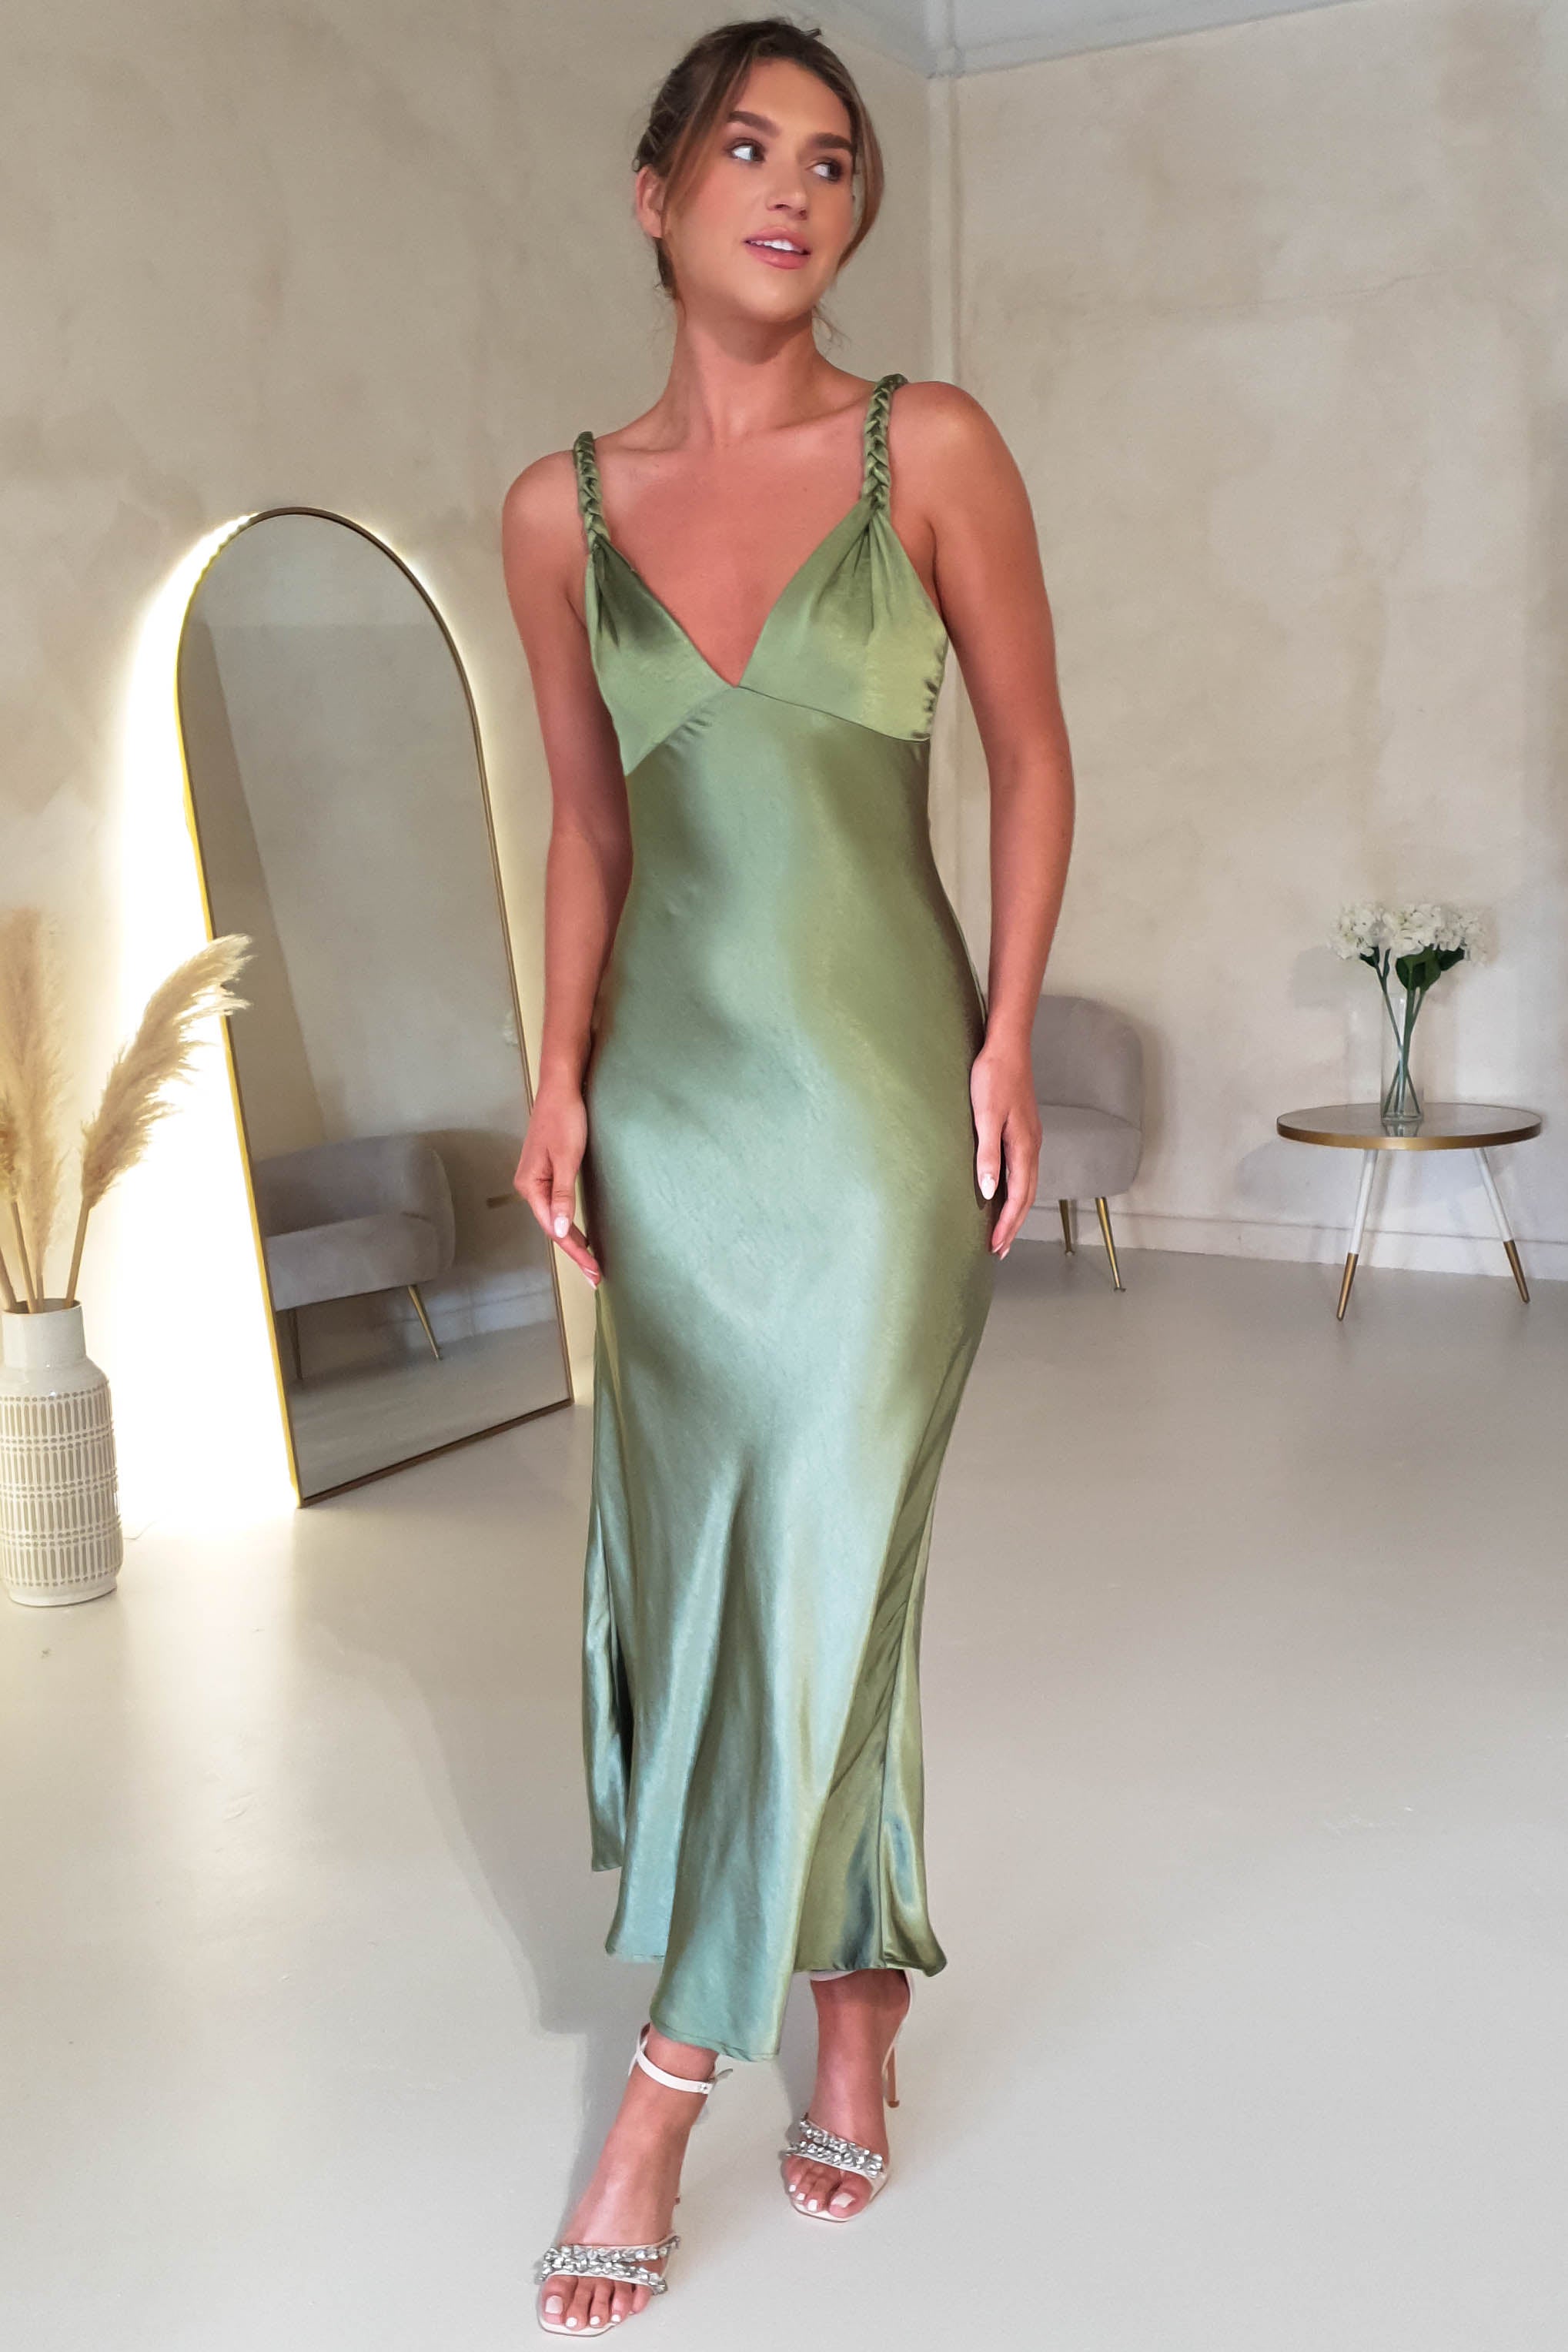 Simple Sheath Cowl Neck Slip Silk Satin Maxi Prom Evening Dresses,982 ·  muttie dresses · Online Store Powered by Storenvy